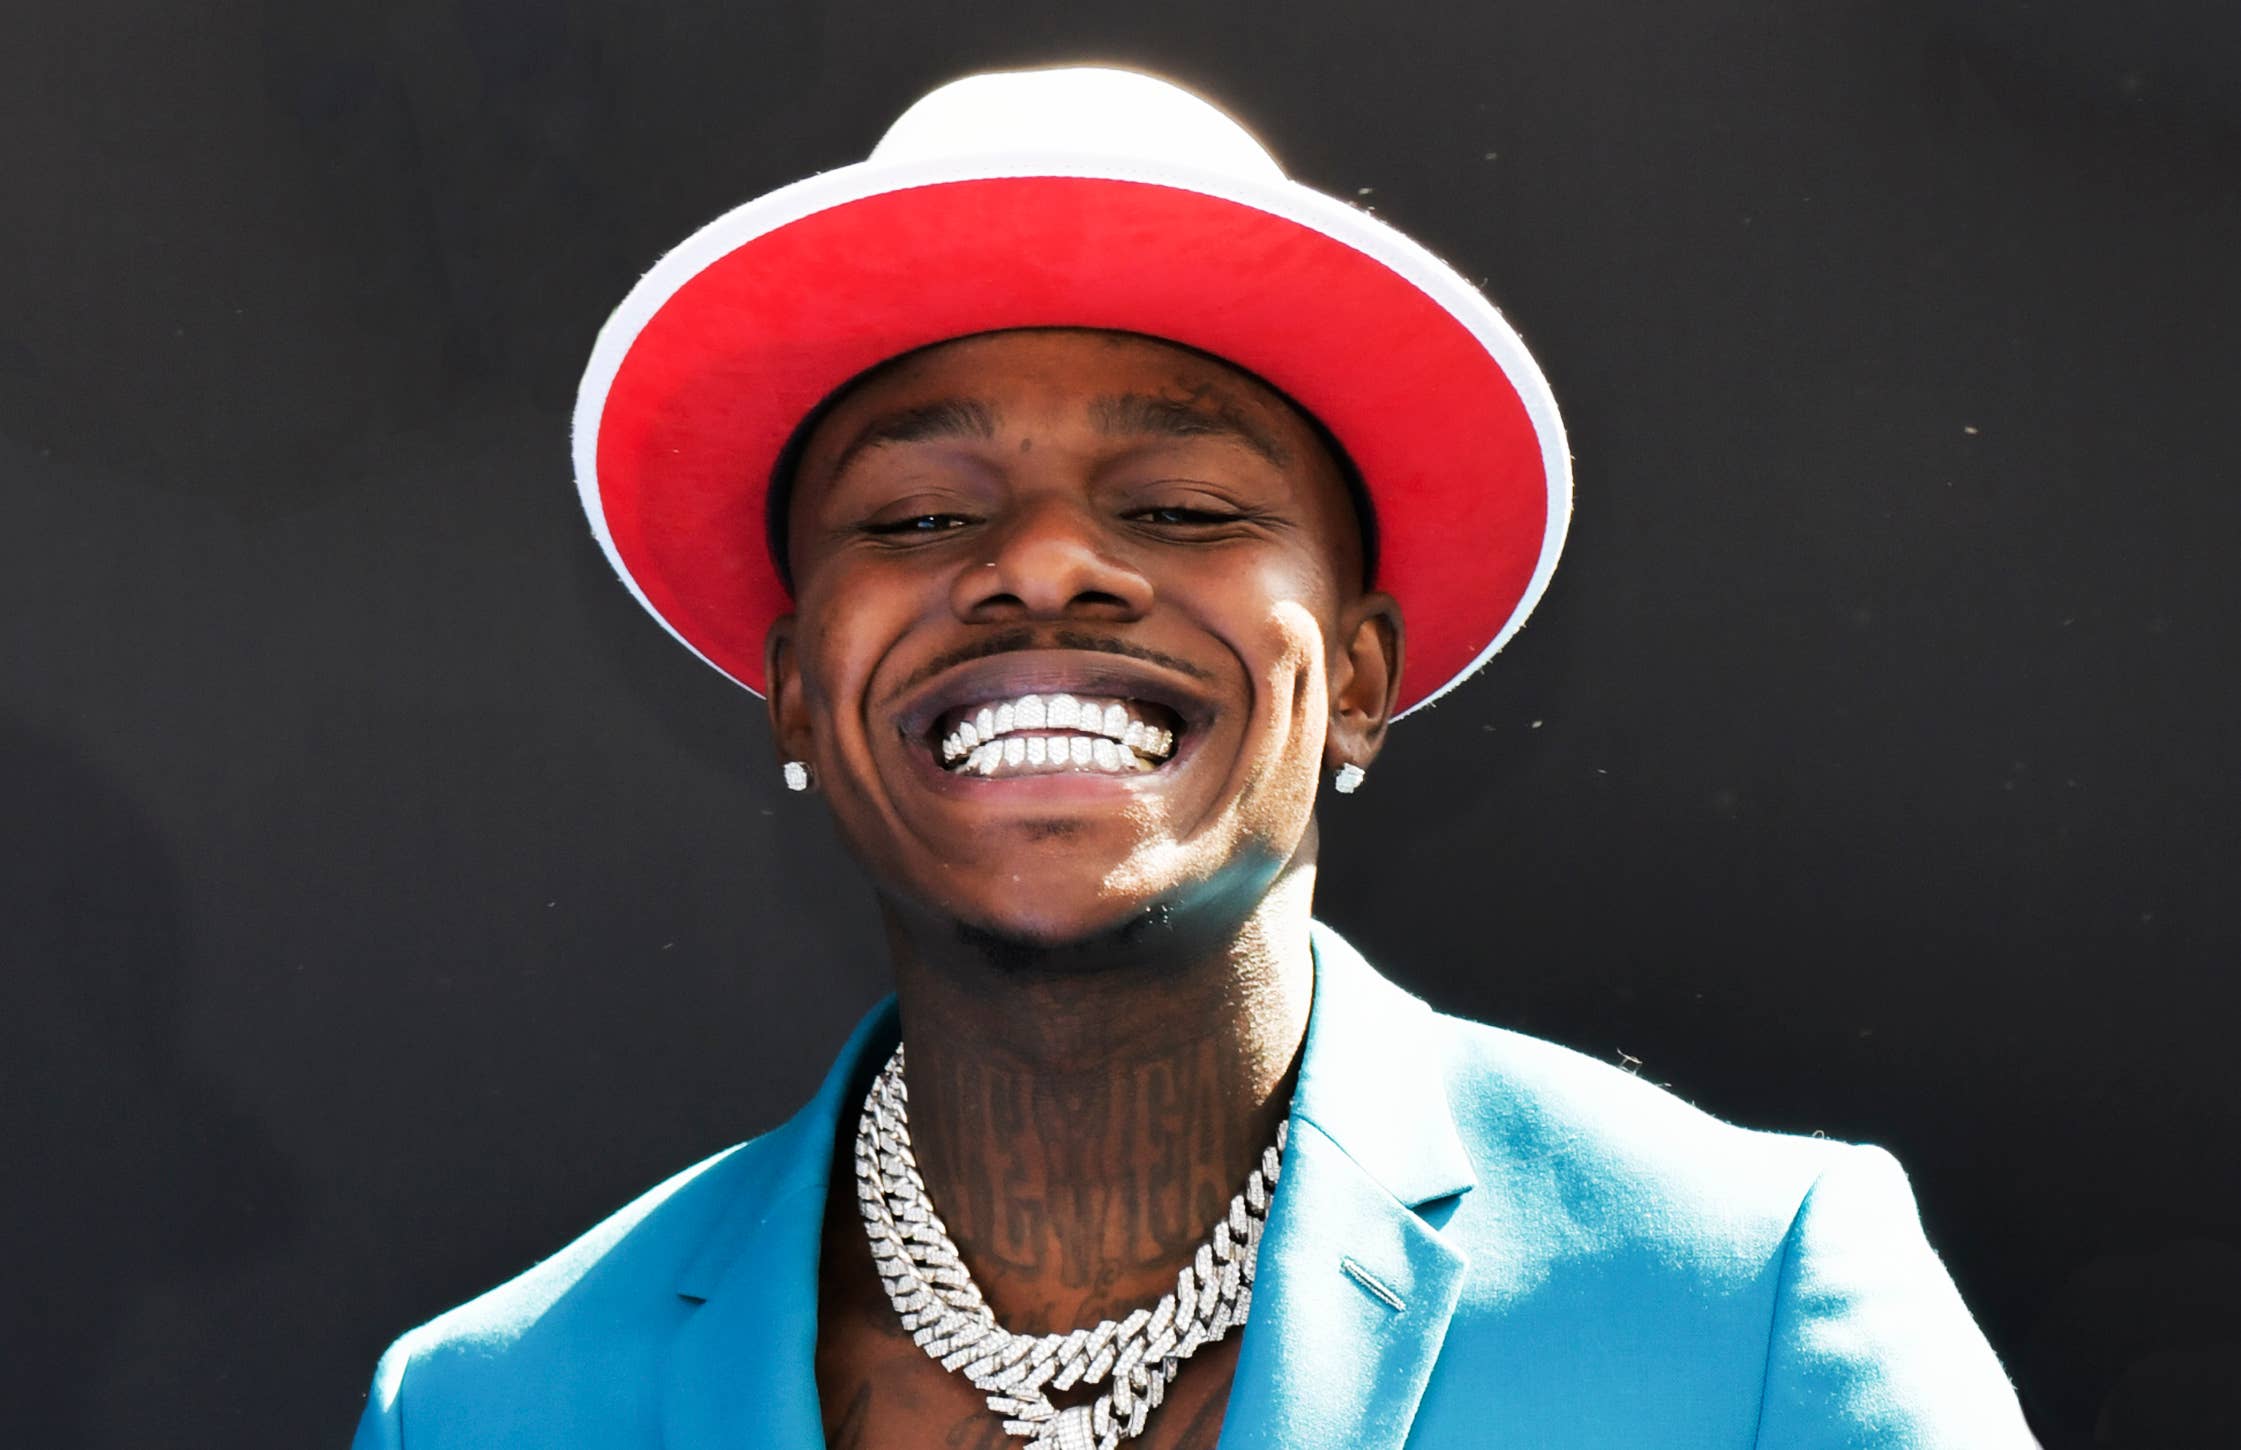 DaBaby Outfits - Iconic Celebrity Outfits